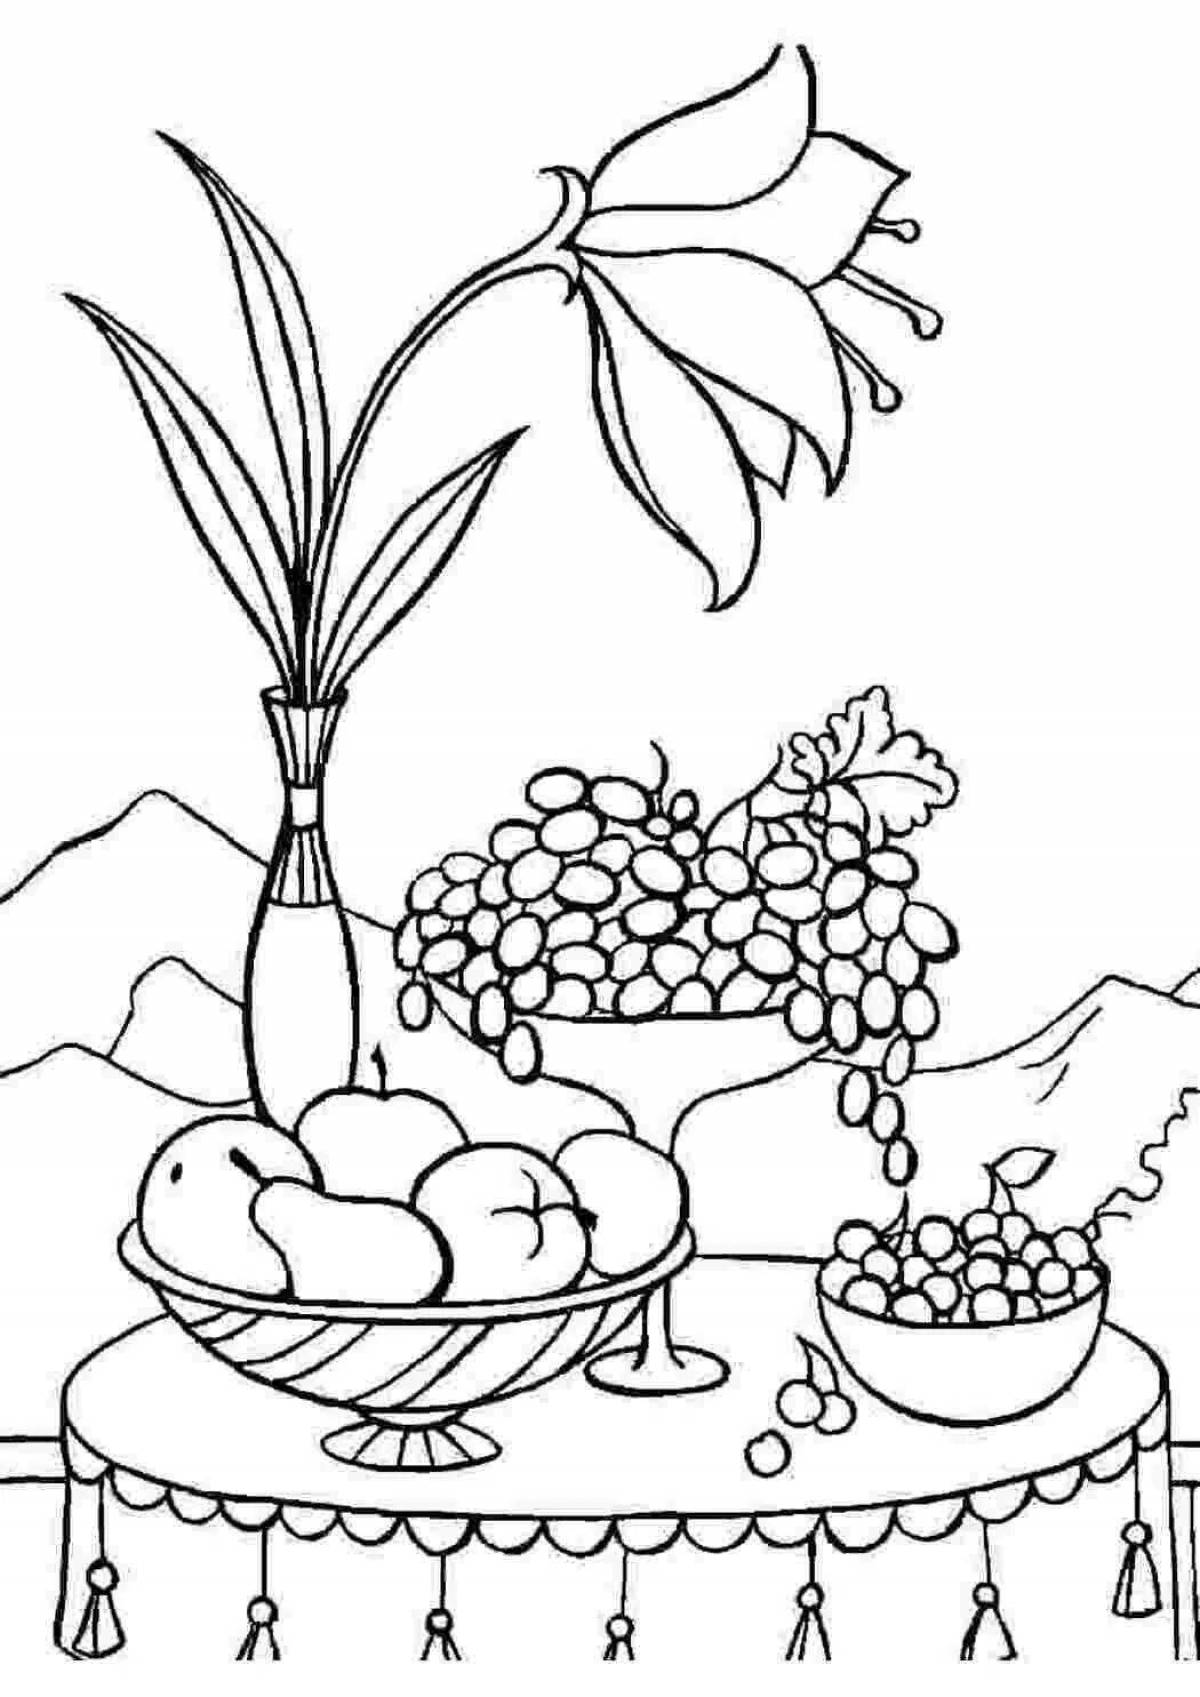 Colorful still life coloring for children 6-7 years old